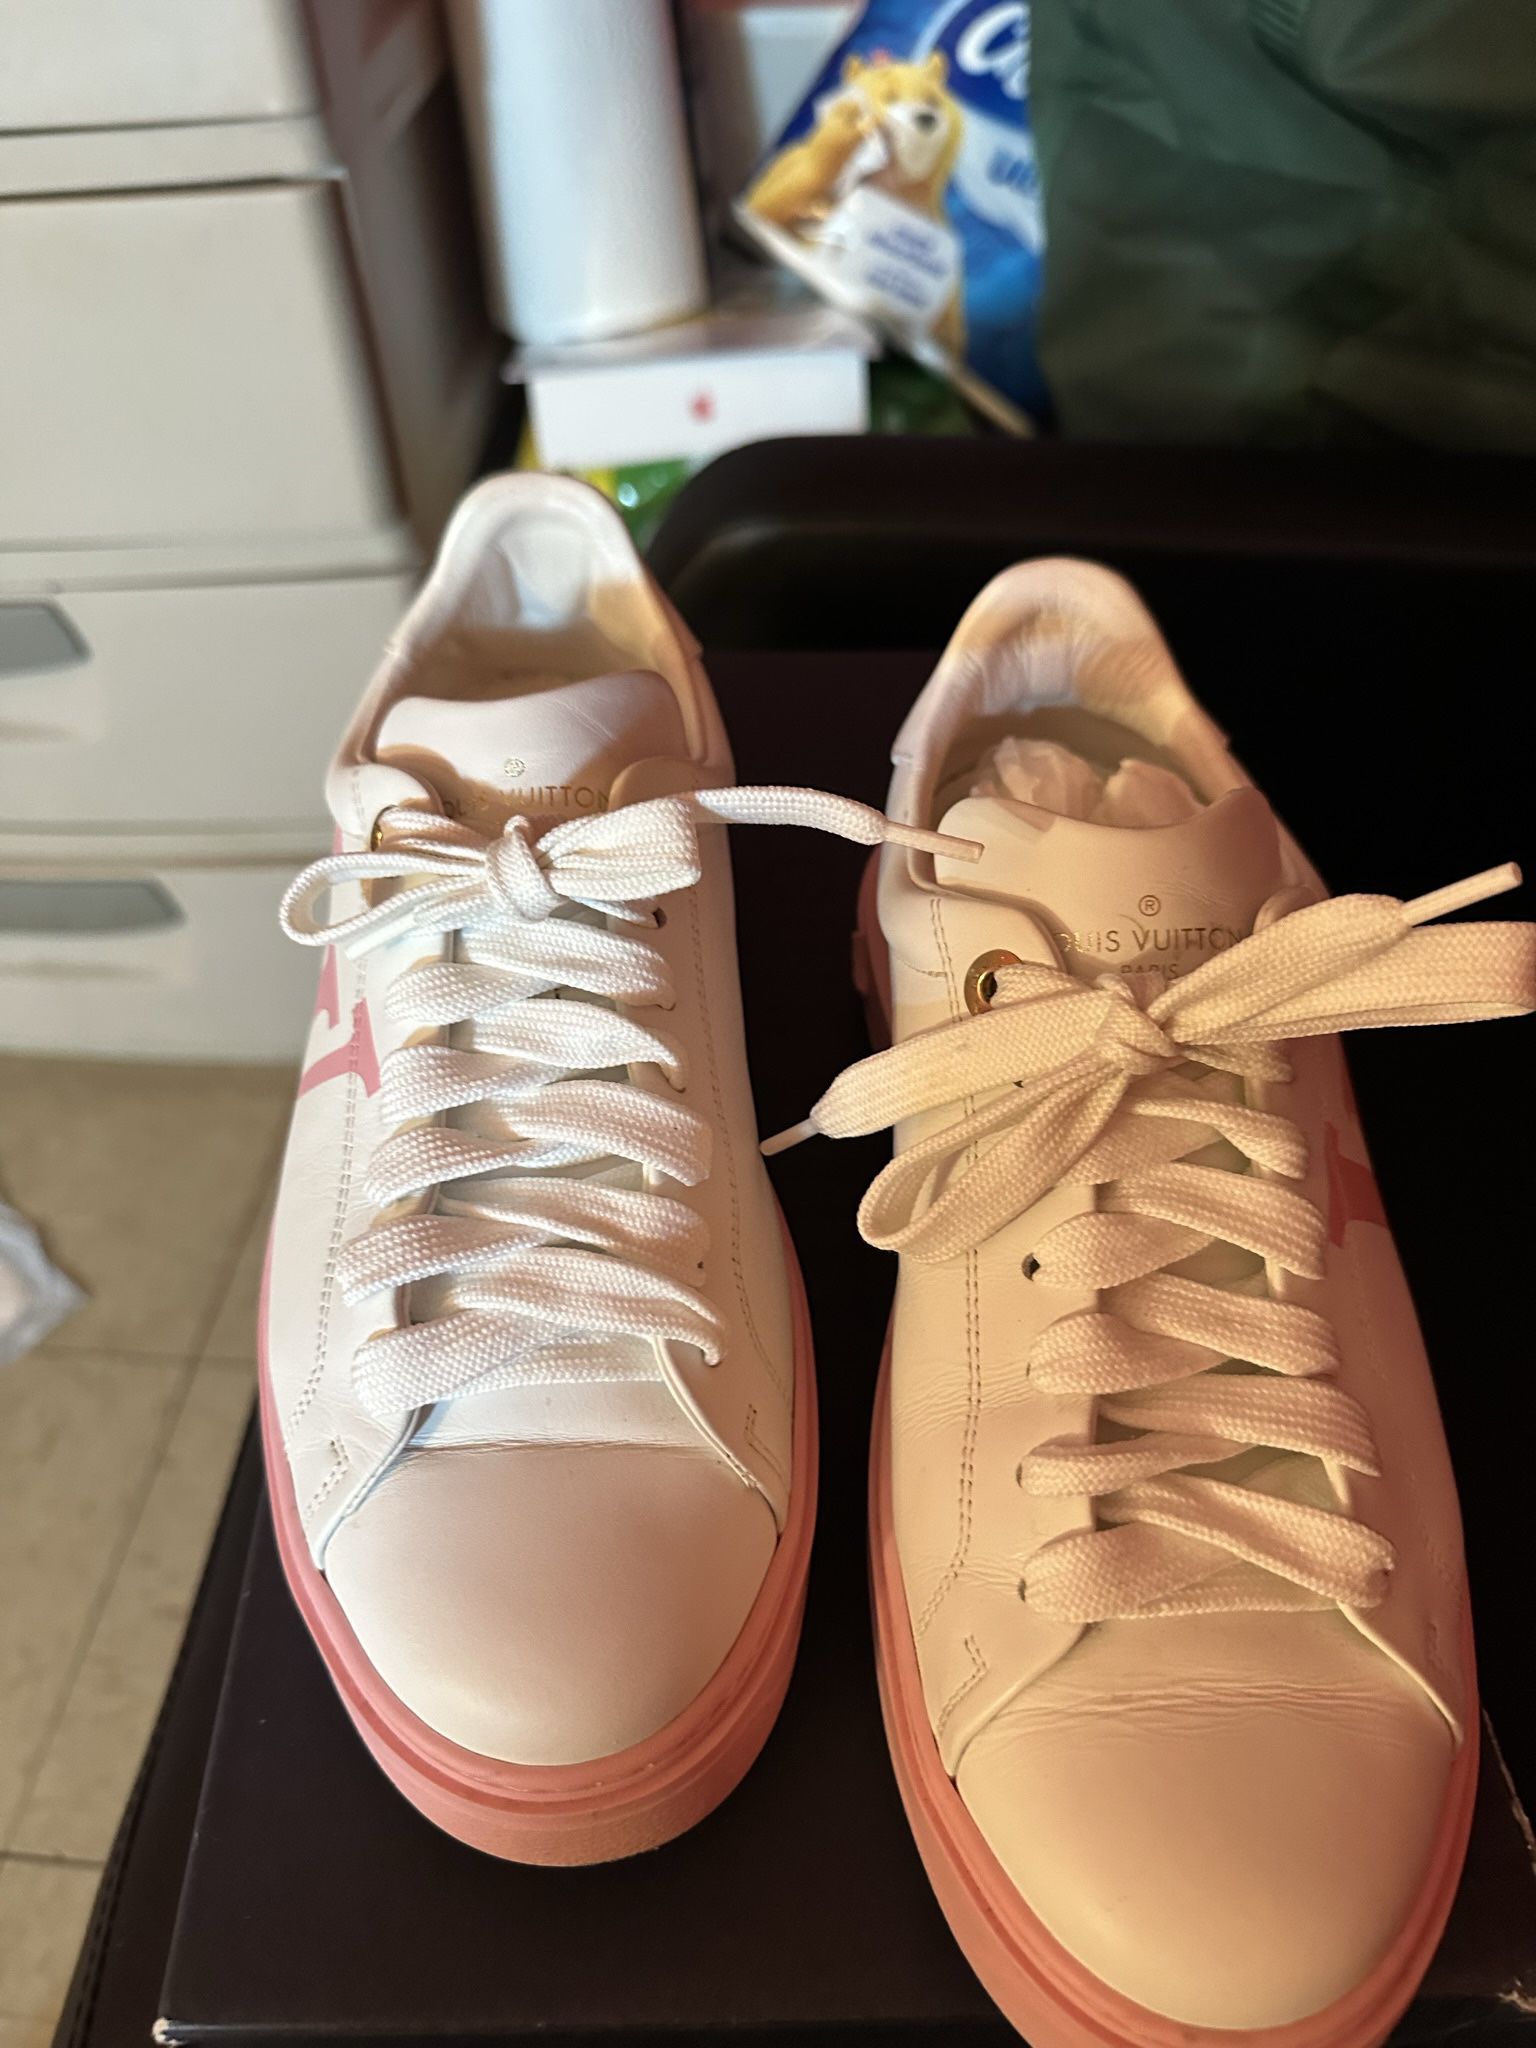 Women's Louis Vuitton “Monogram Escale Time out” Sneakers Size 39 (8.5) for  Sale in Bellevue, WA - OfferUp